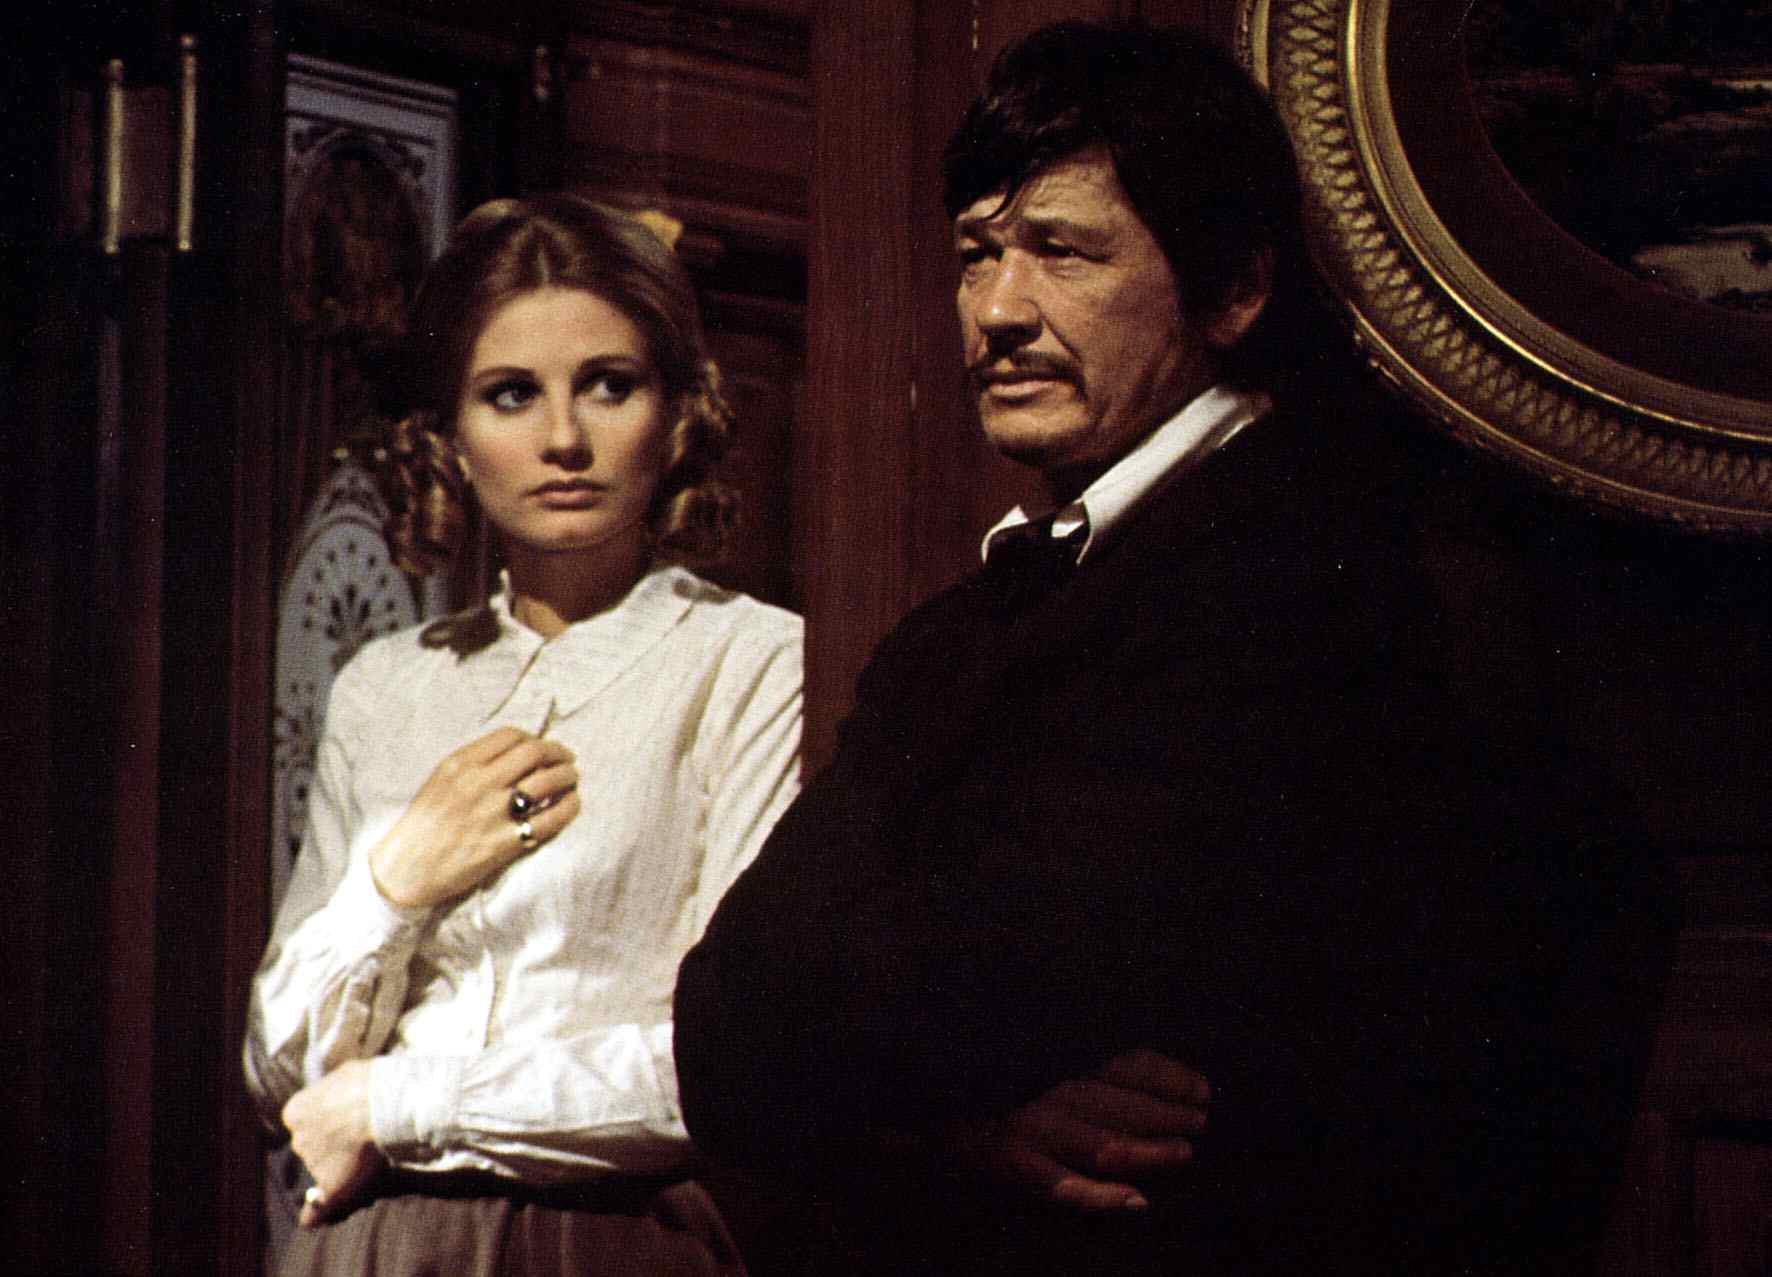  Jill Ireland, and Charles Bronson Im Winter, Circa 1975 | Source: Getty Images